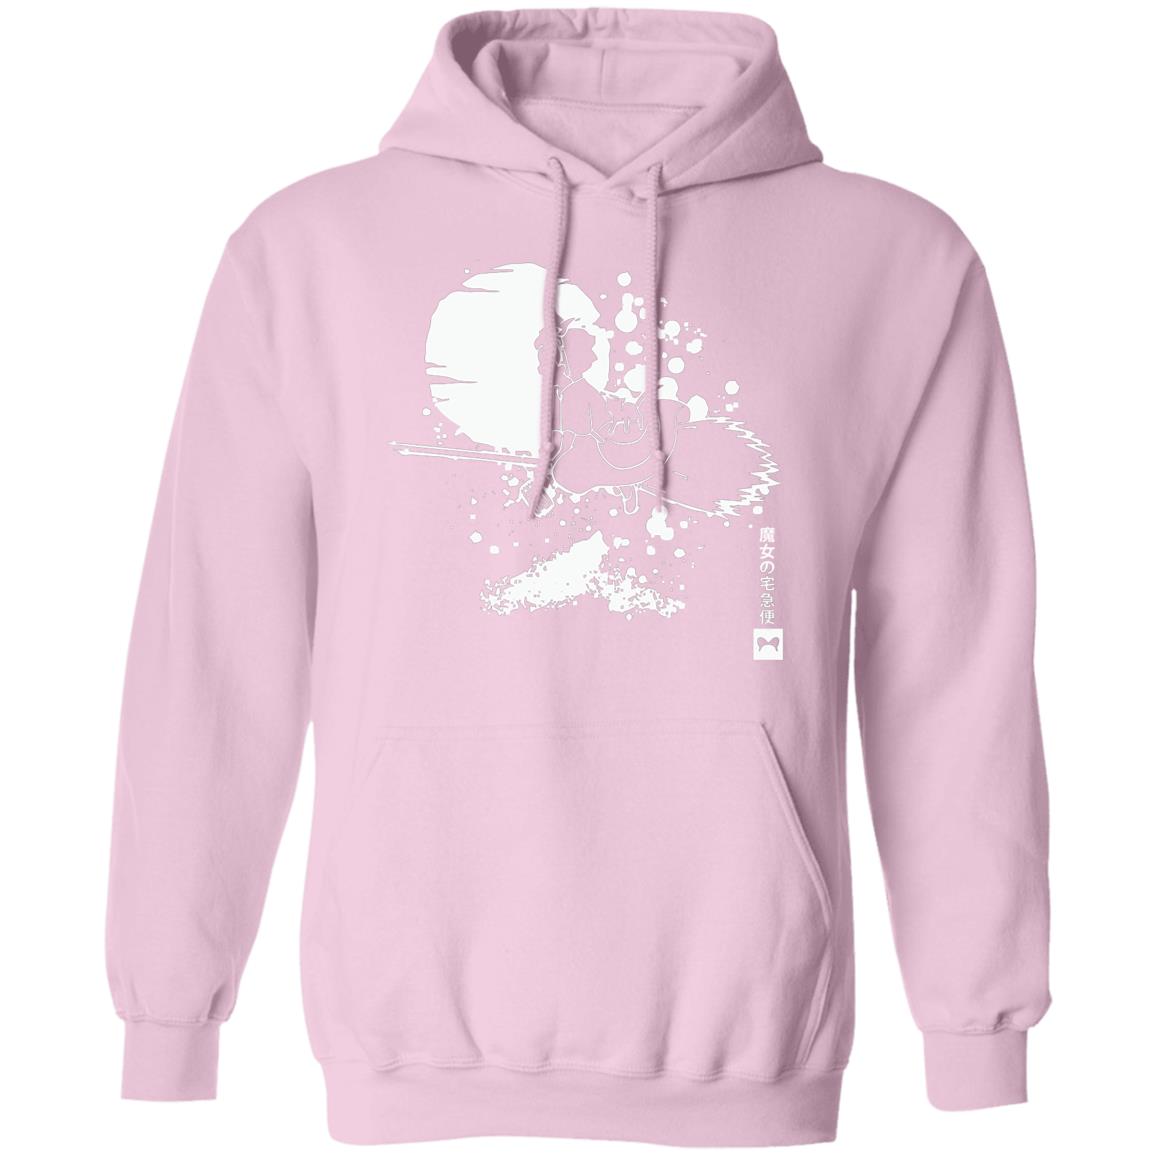 Kiki’s Delivery Service – Flying in the night Hoodie Unisex